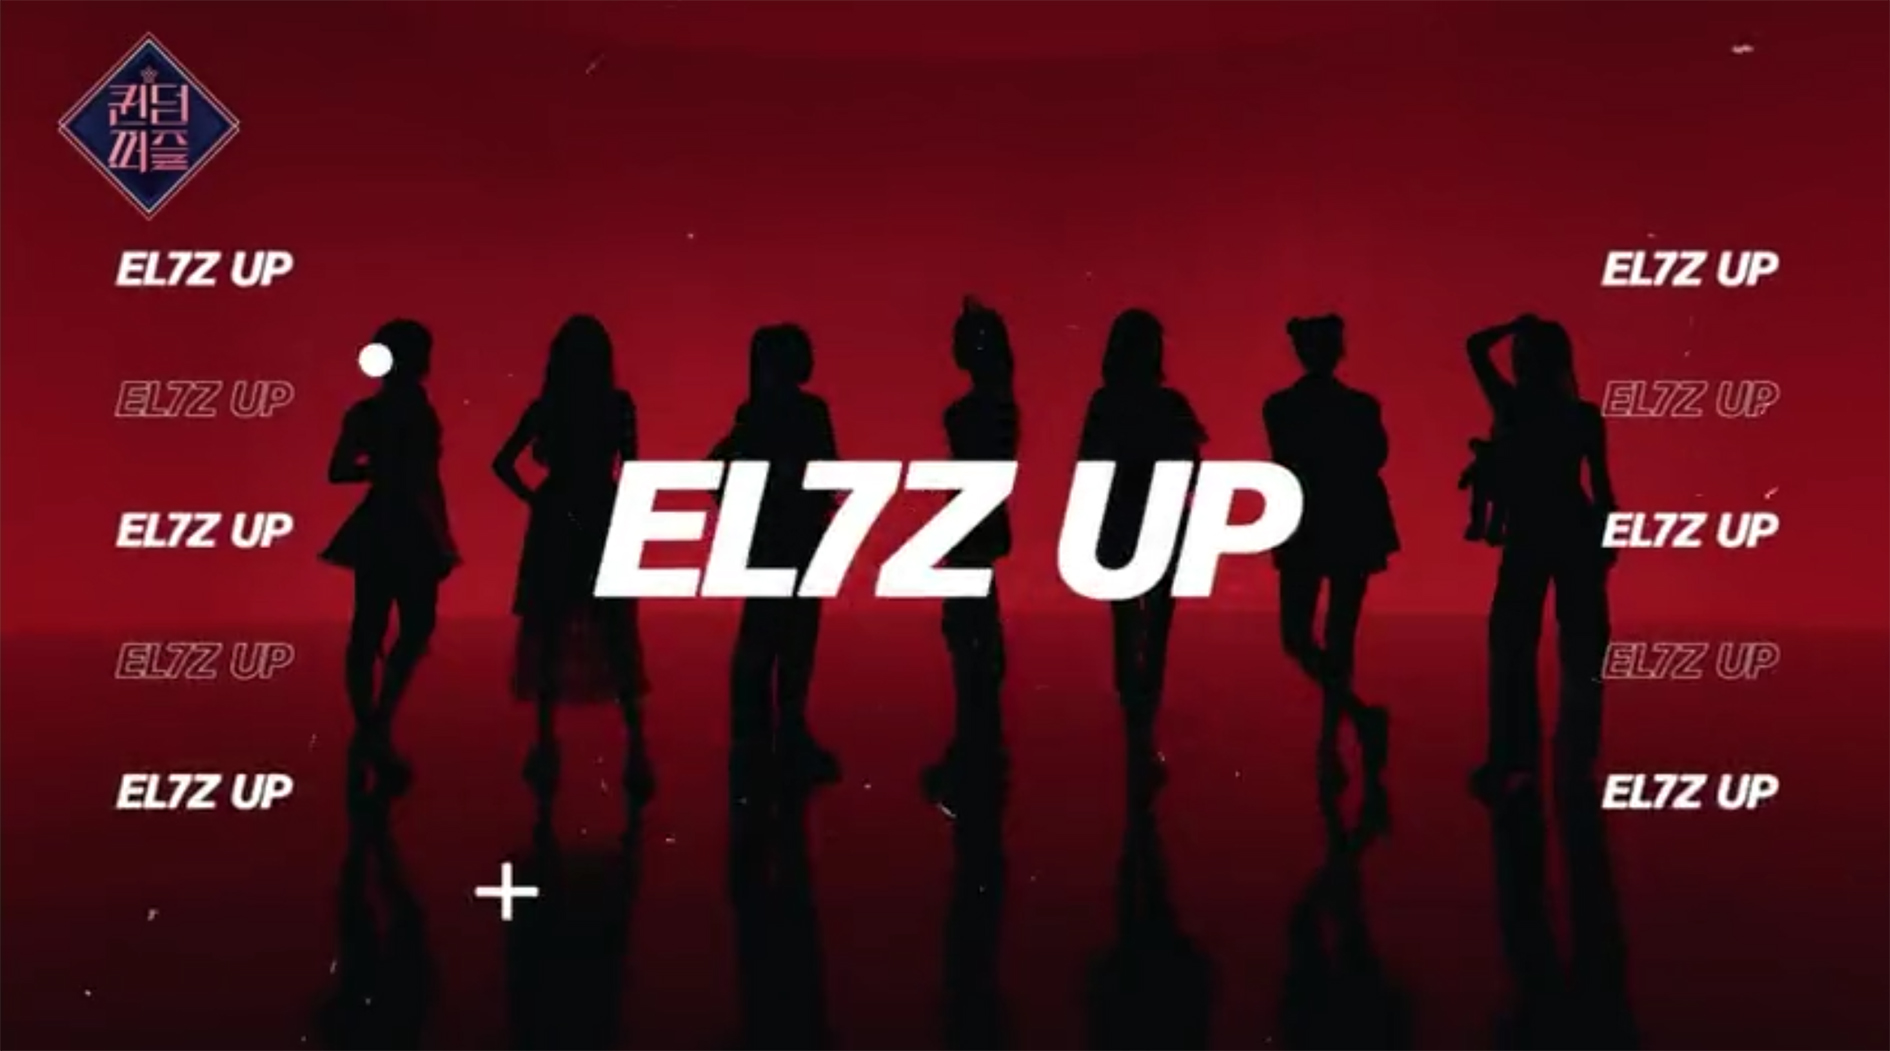 Who Are the EL7Z UP Members?